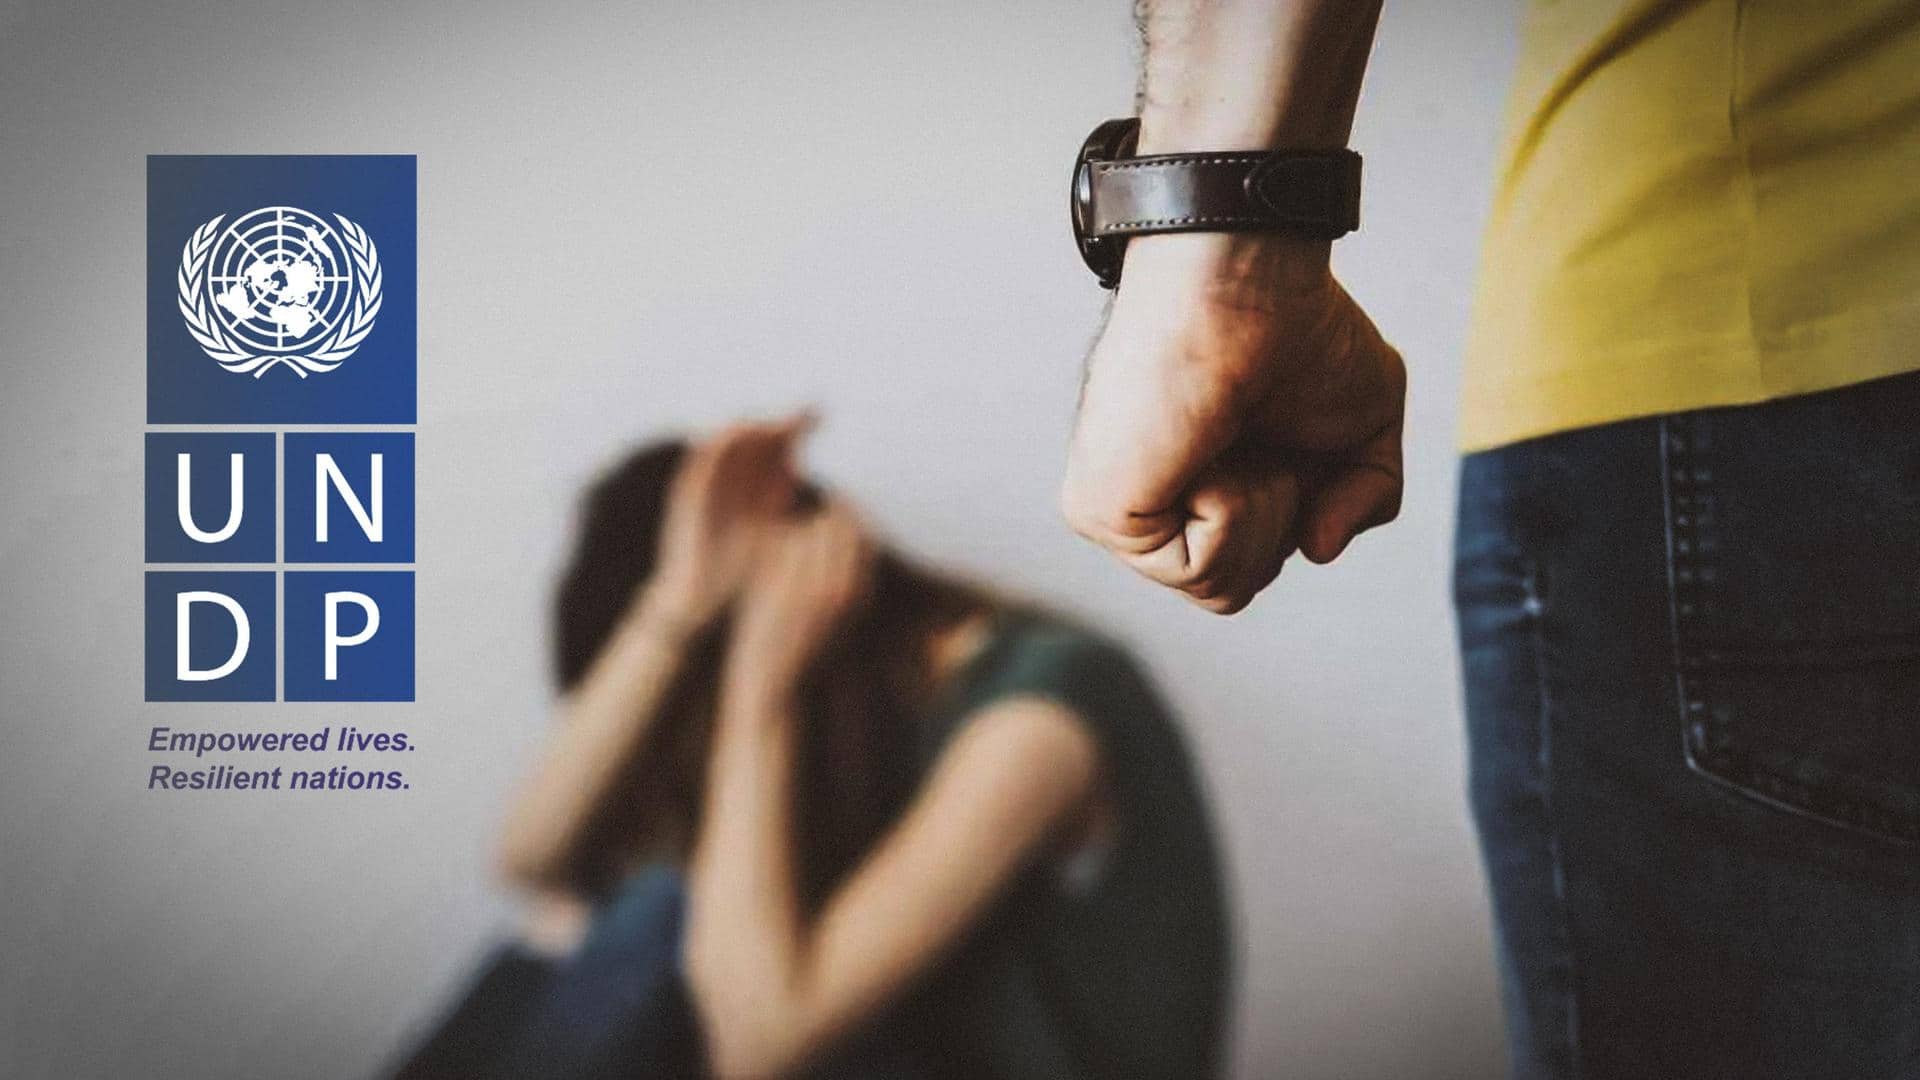 25% of people globally think wife beating is justified: UN